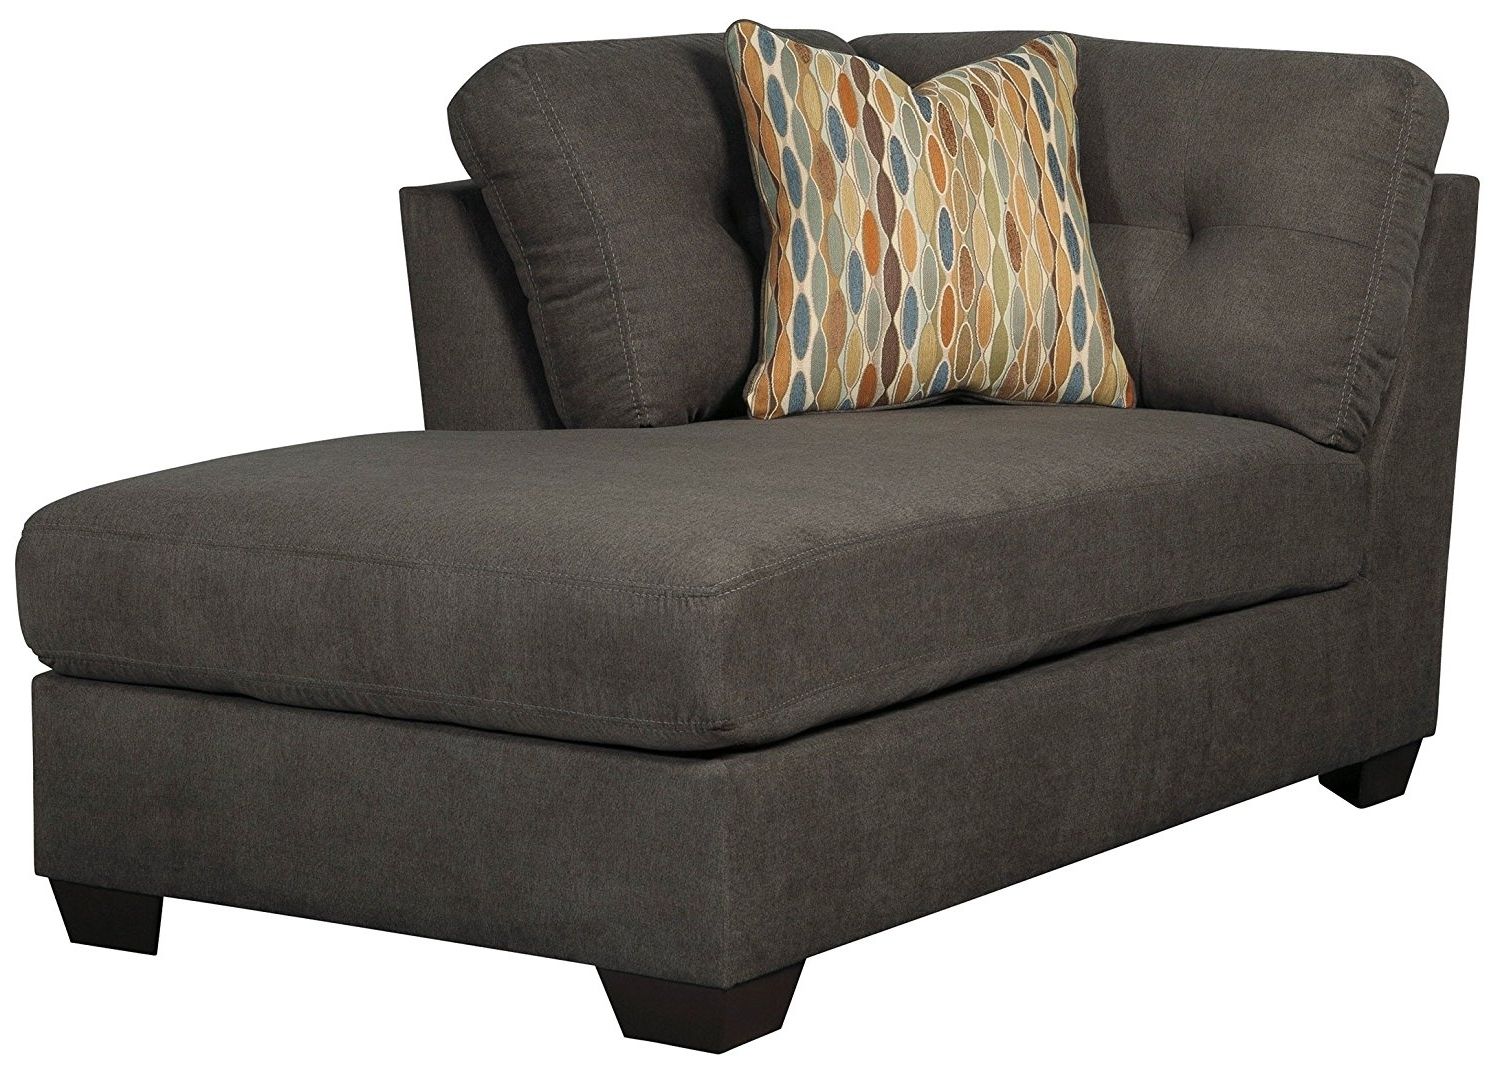 Amazon: Ashley Furniture Delta City Right Corner Chaise Lounge Intended For Most Up To Date Corner Chaise Lounges (Photo 1 of 15)